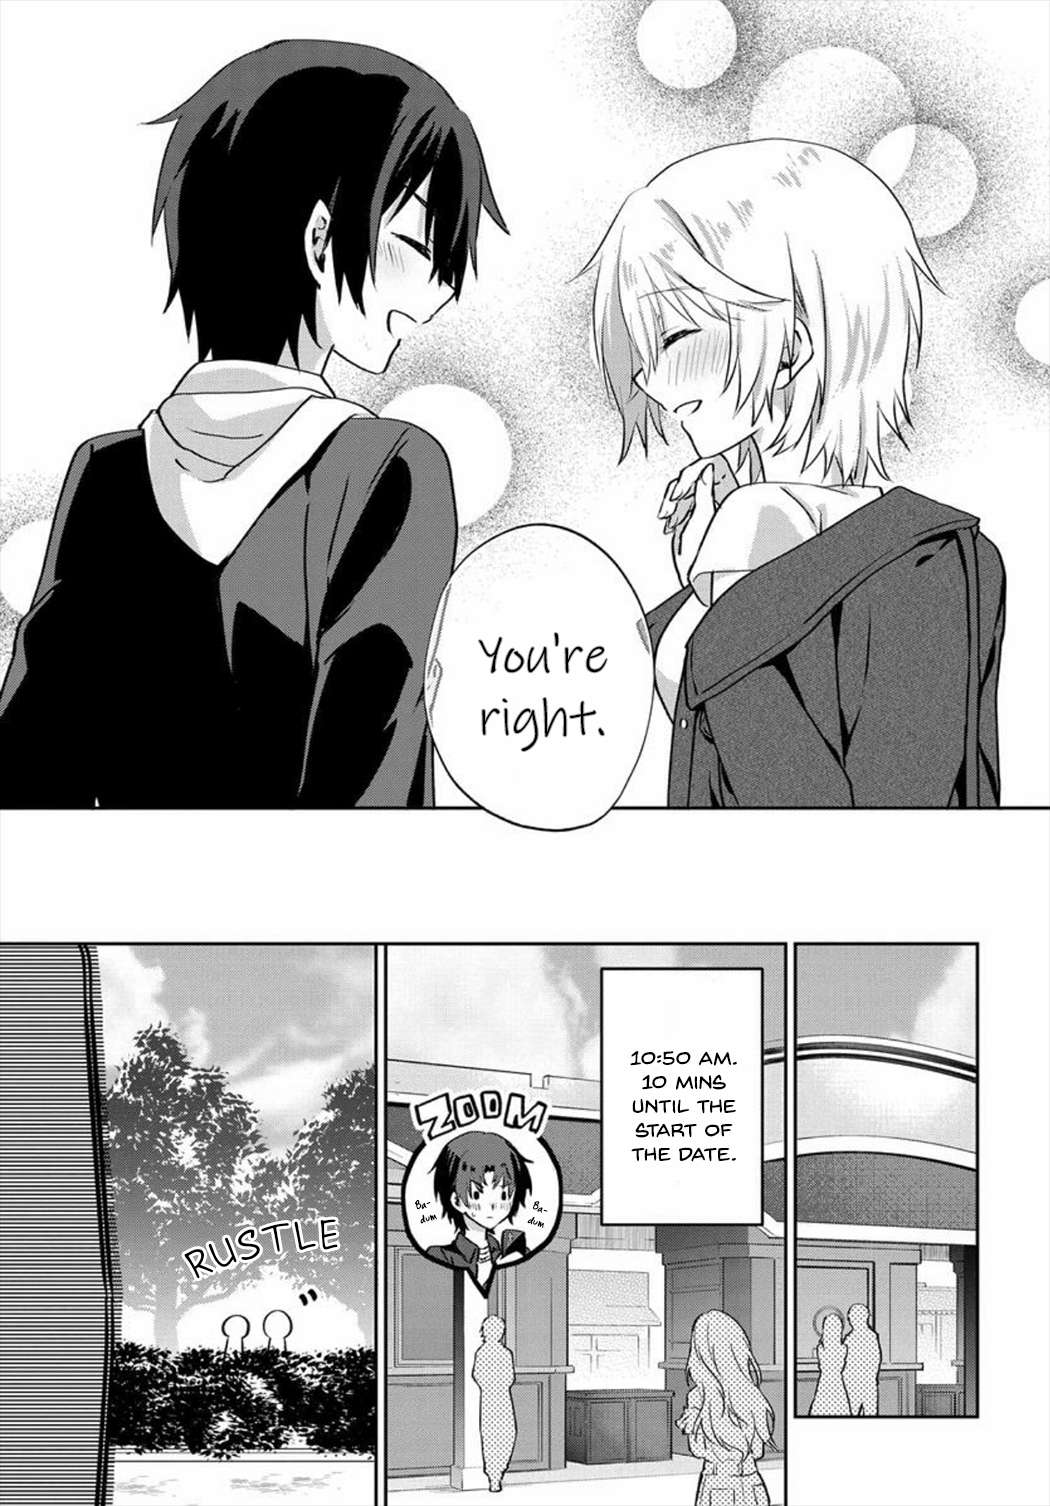 Since I’ve Entered the World of Romantic Comedy Manga, I’ll Do My Best to Make the Losing Heroine Happy. - chapter 6.2 - #4